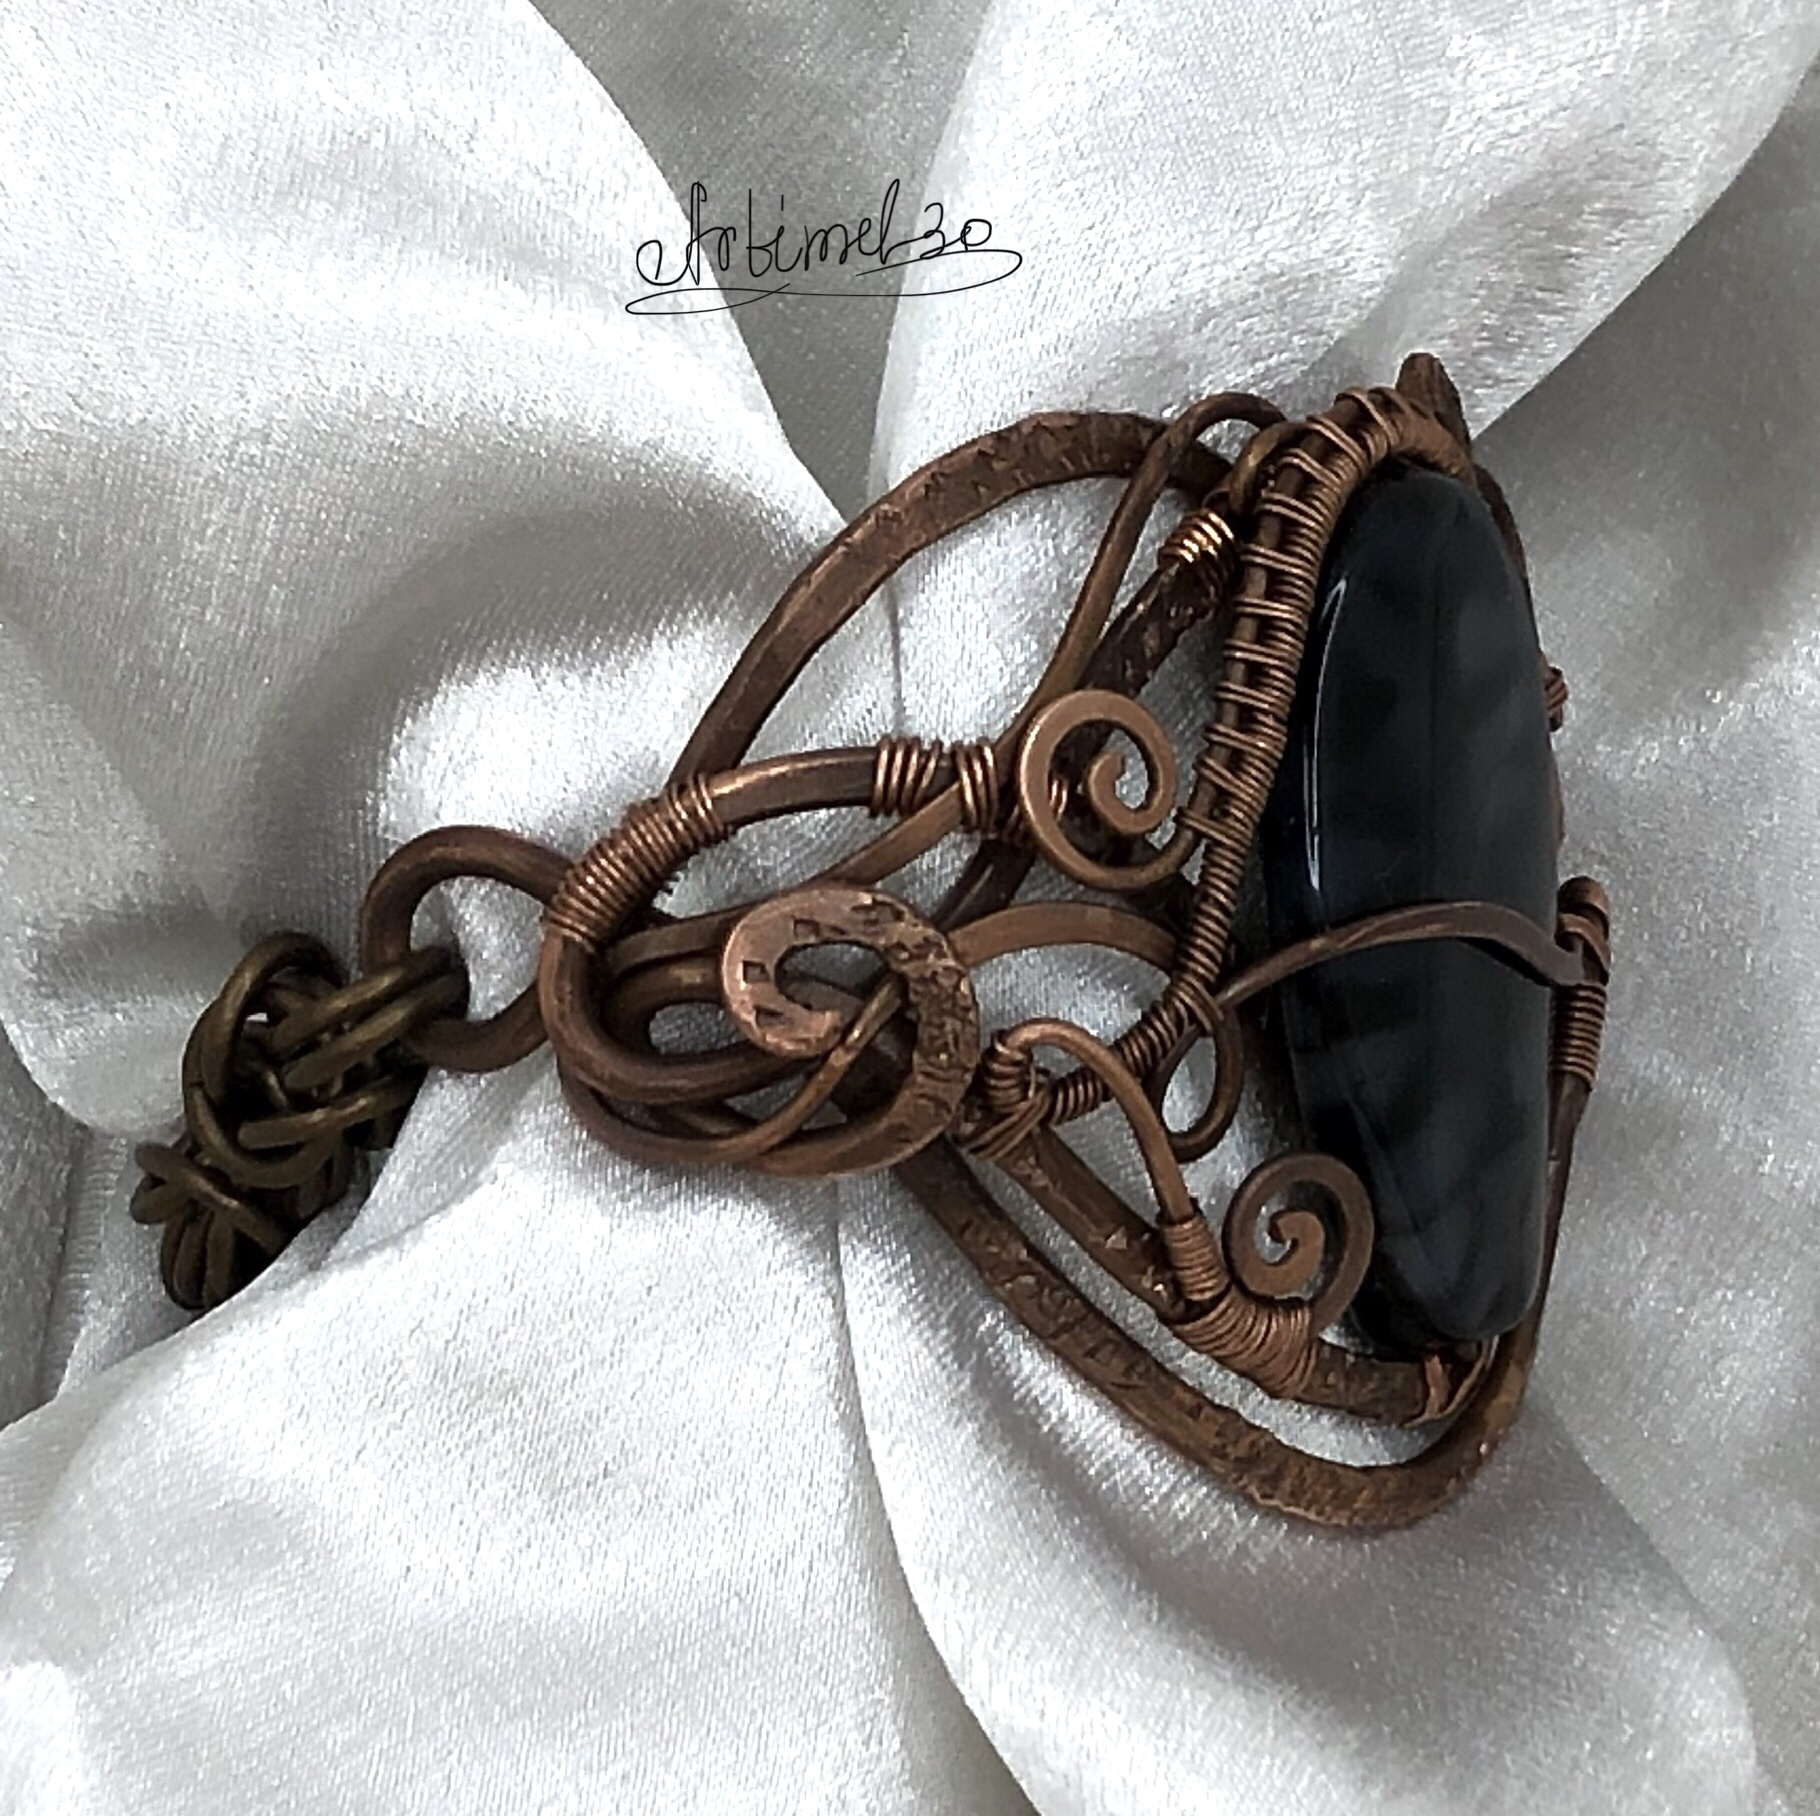 Copper Bracelet Wire wrapped Agate stone 3